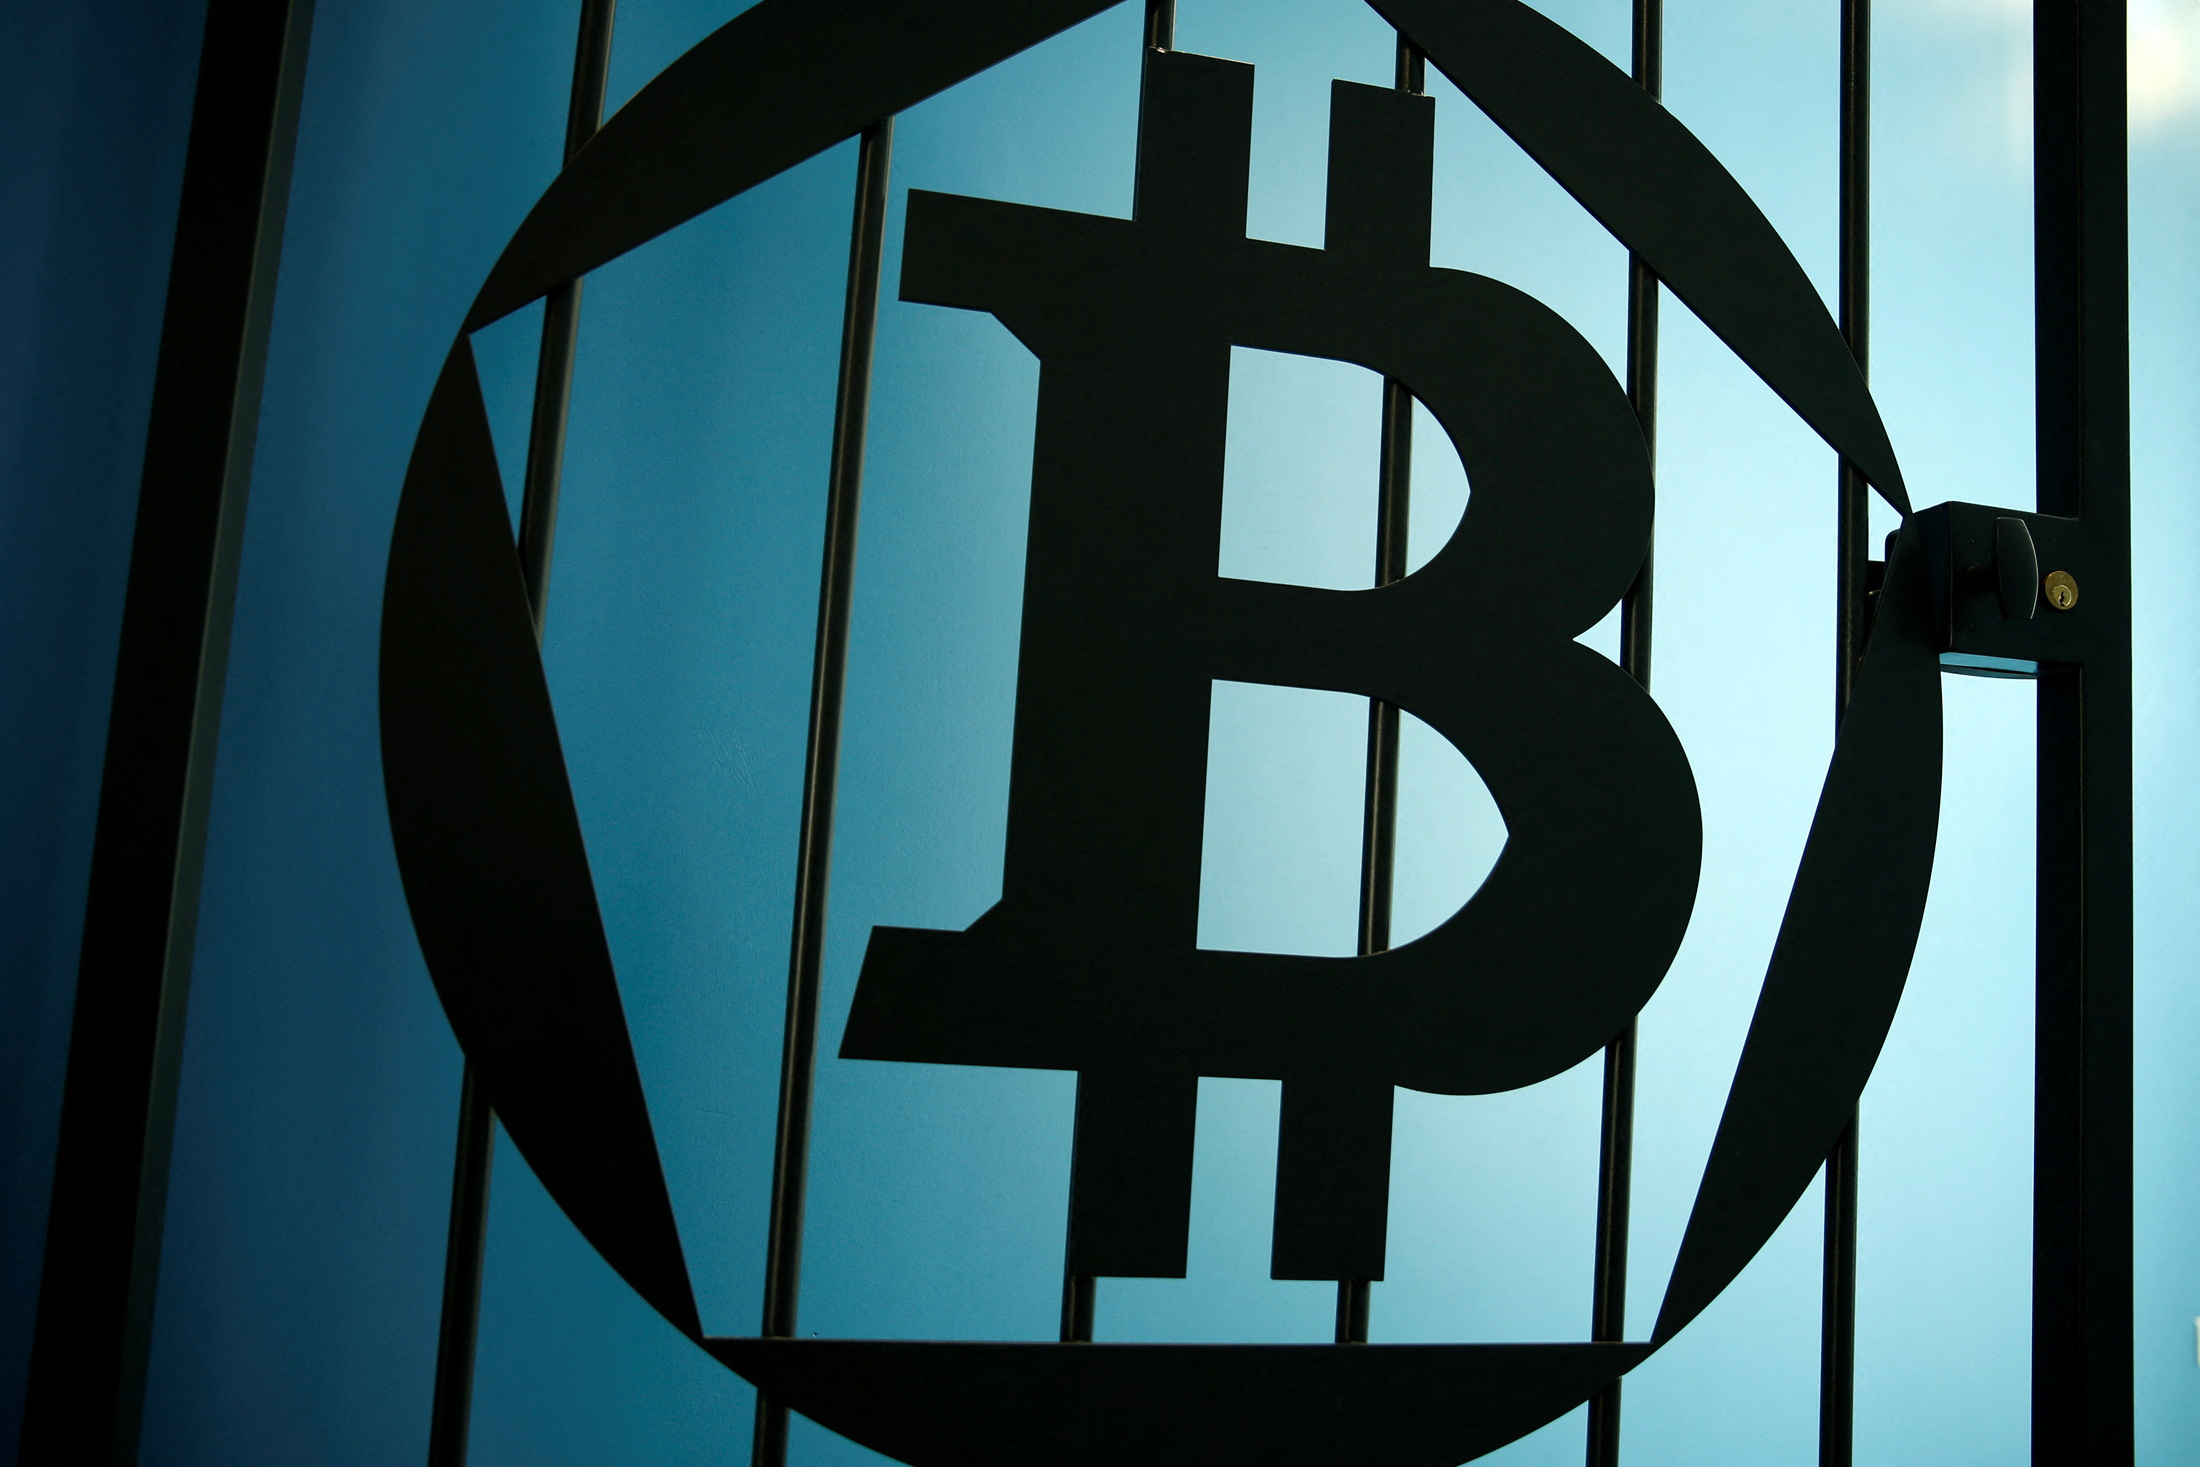 The US has made bitcoin 'mainstream' by approving ETFs, so what's